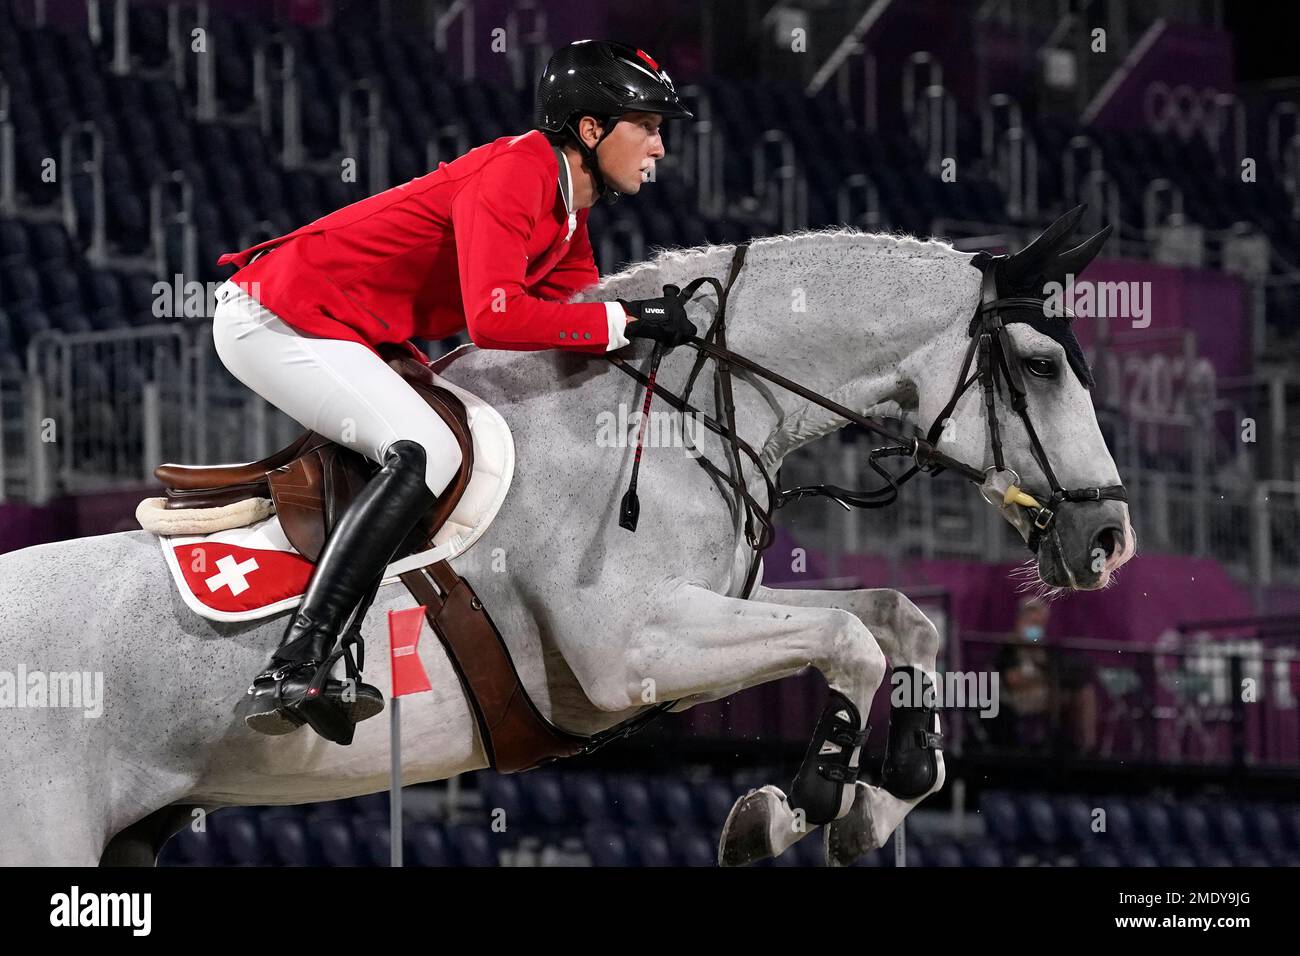 Switzerlands Martin Fuchs, riding Clooney 51, competes during the equestrian jumping team final at Equestrian Park